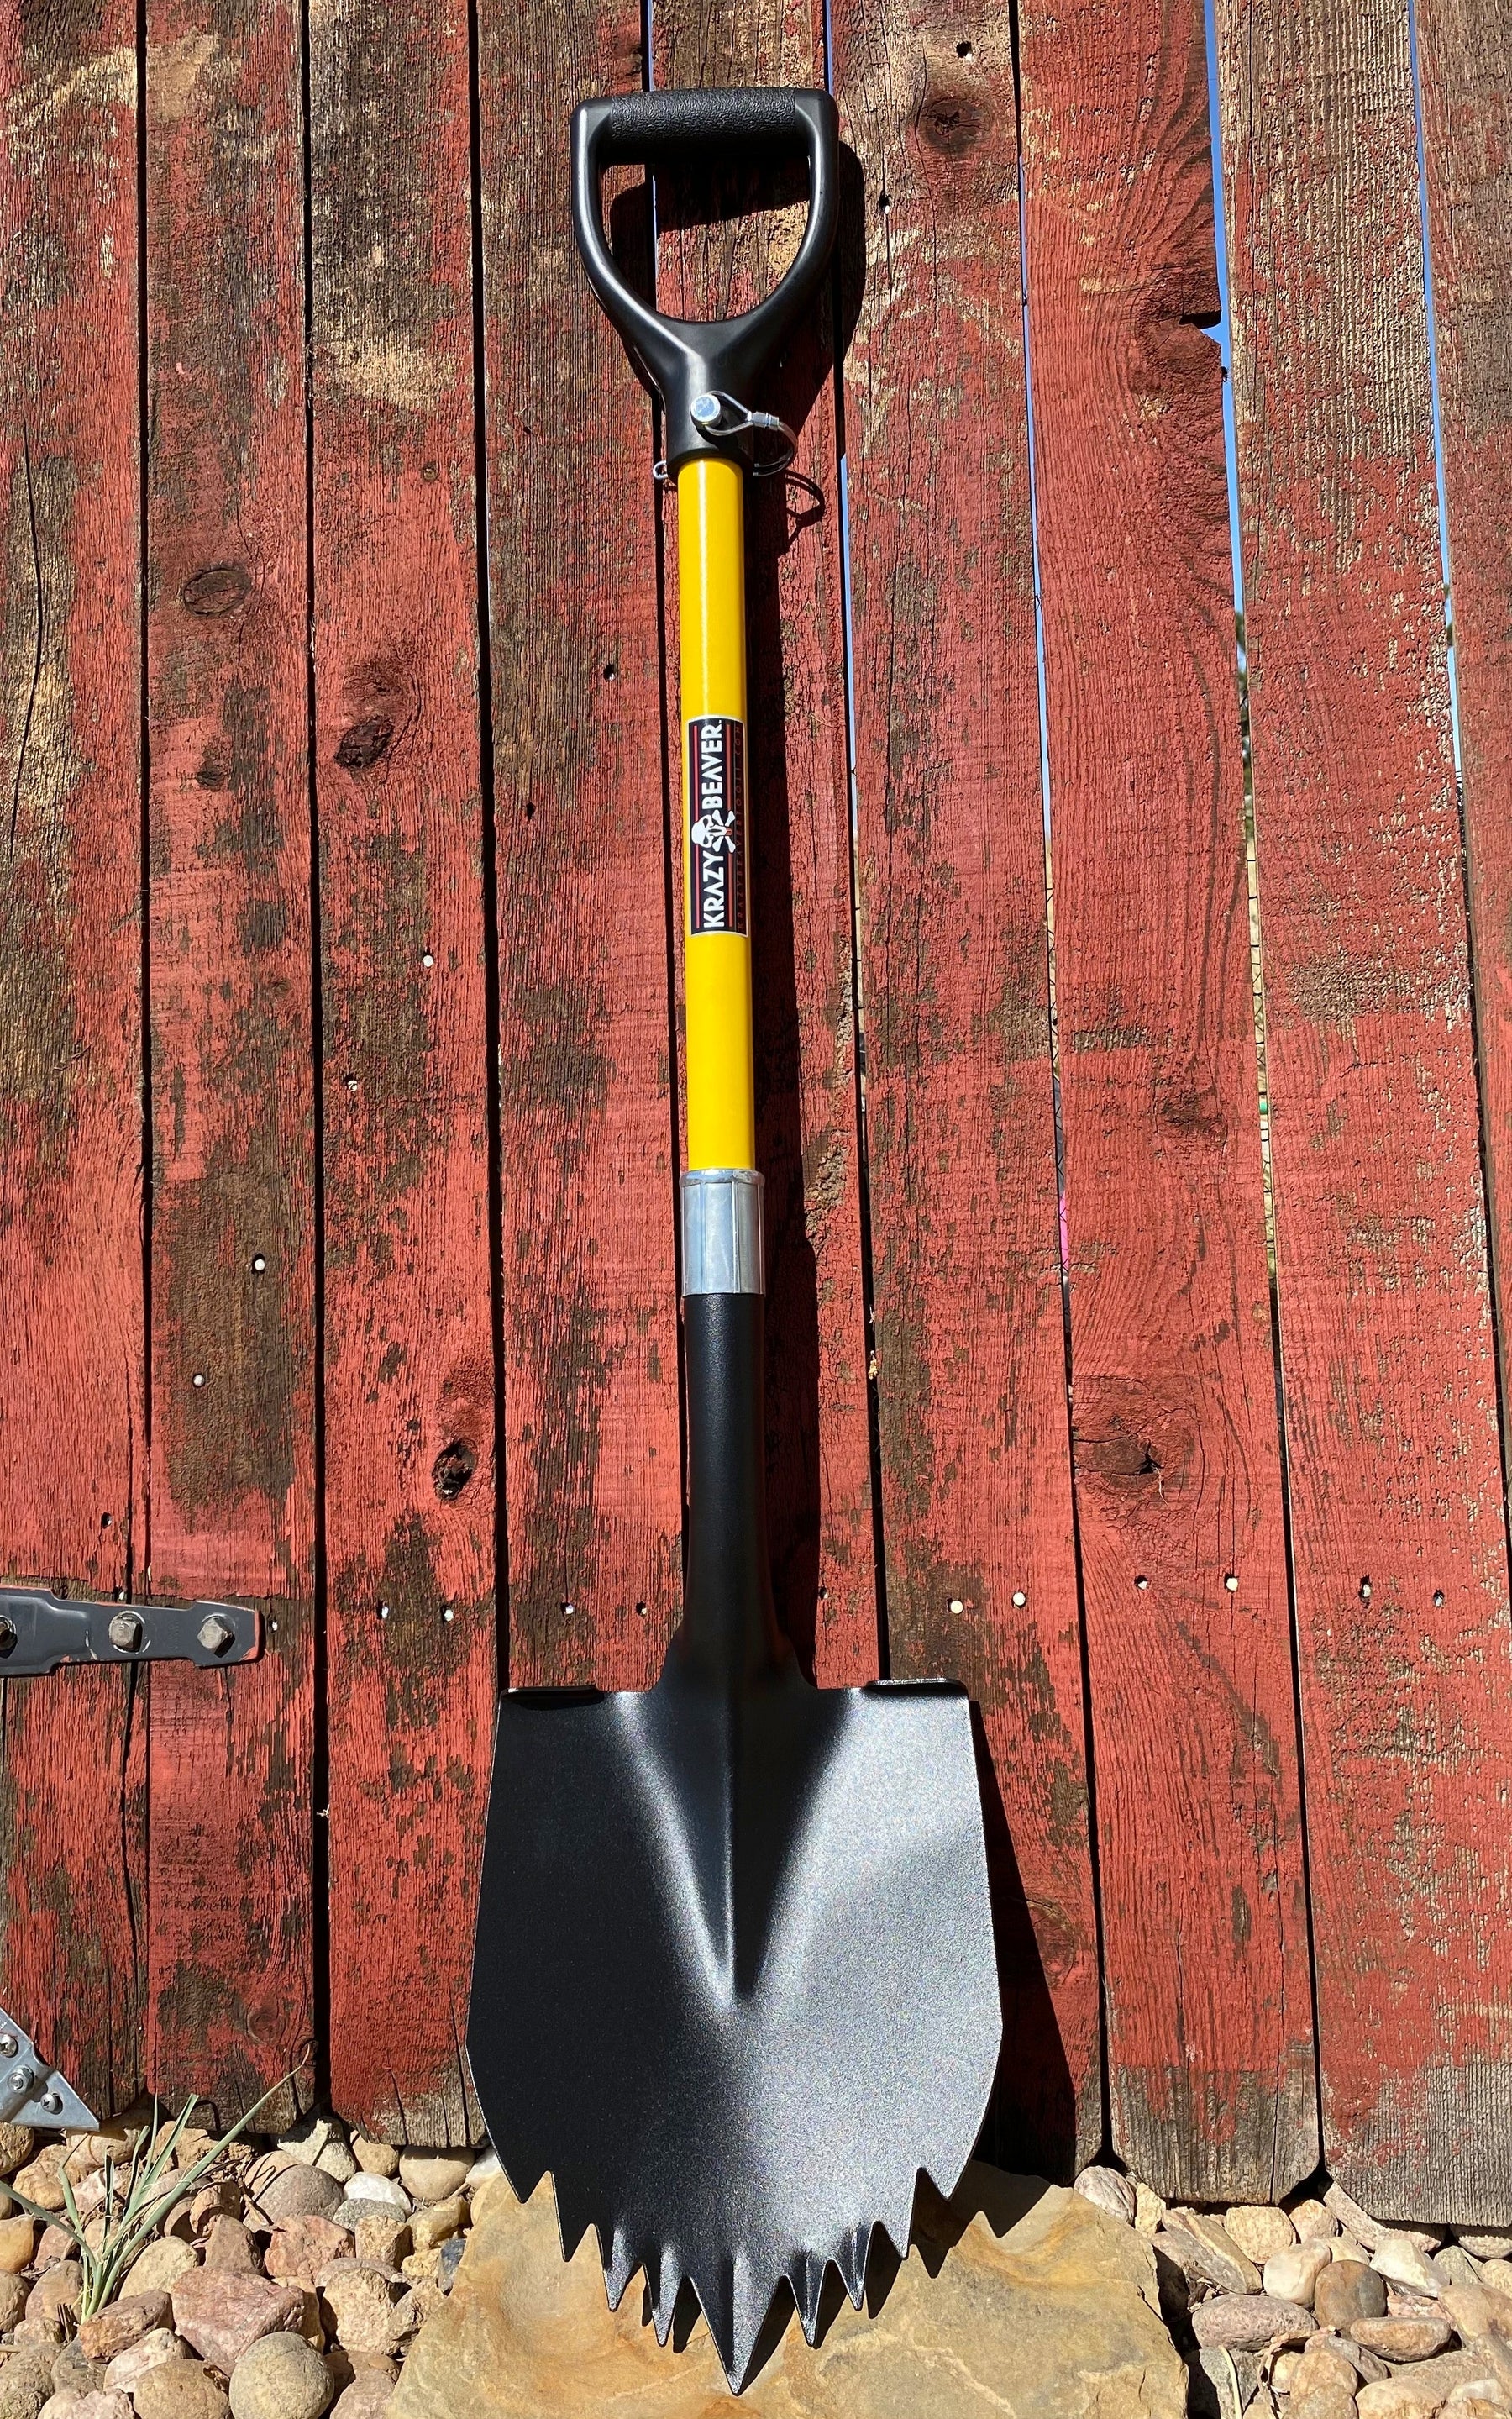 Krazy Beaver Shovel (Black Textured Head / Yellow Handle 45635)  Recovery Gear, Camping gear, Shovel, Camping Krazy Beaver Tools- Overland Kitted